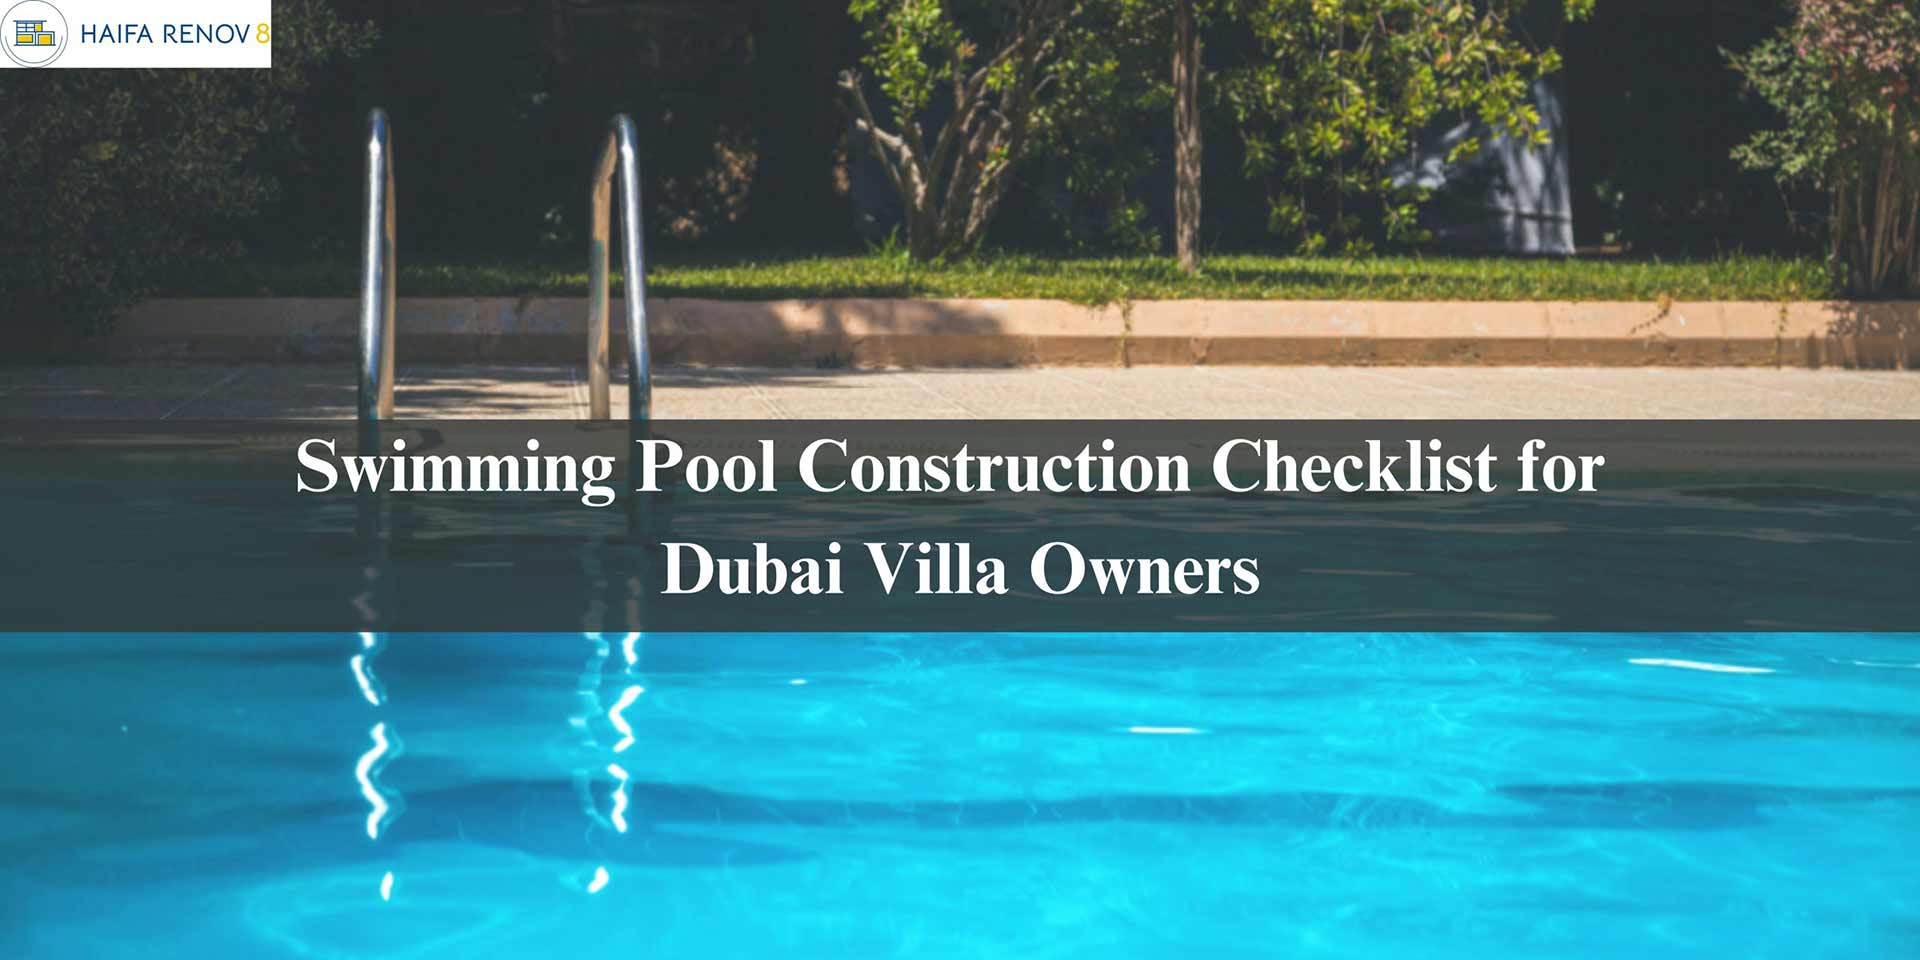 Pool cleaning and maintenance company in Dubai